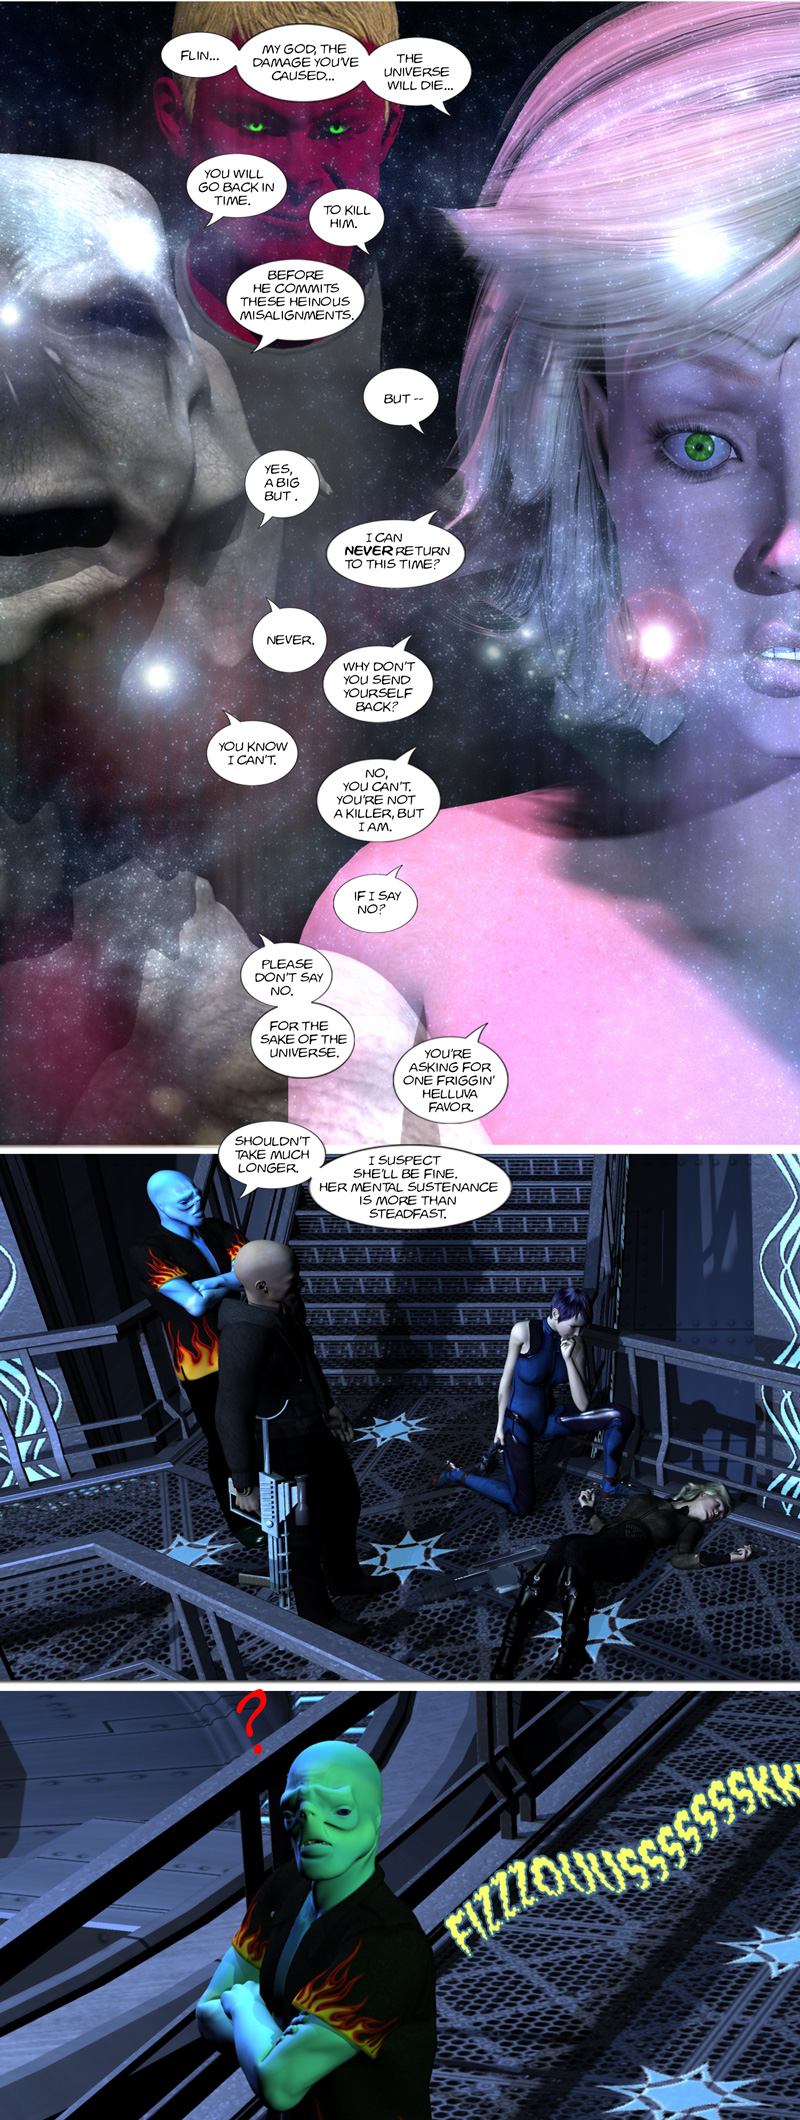 Chapter 10, page 9